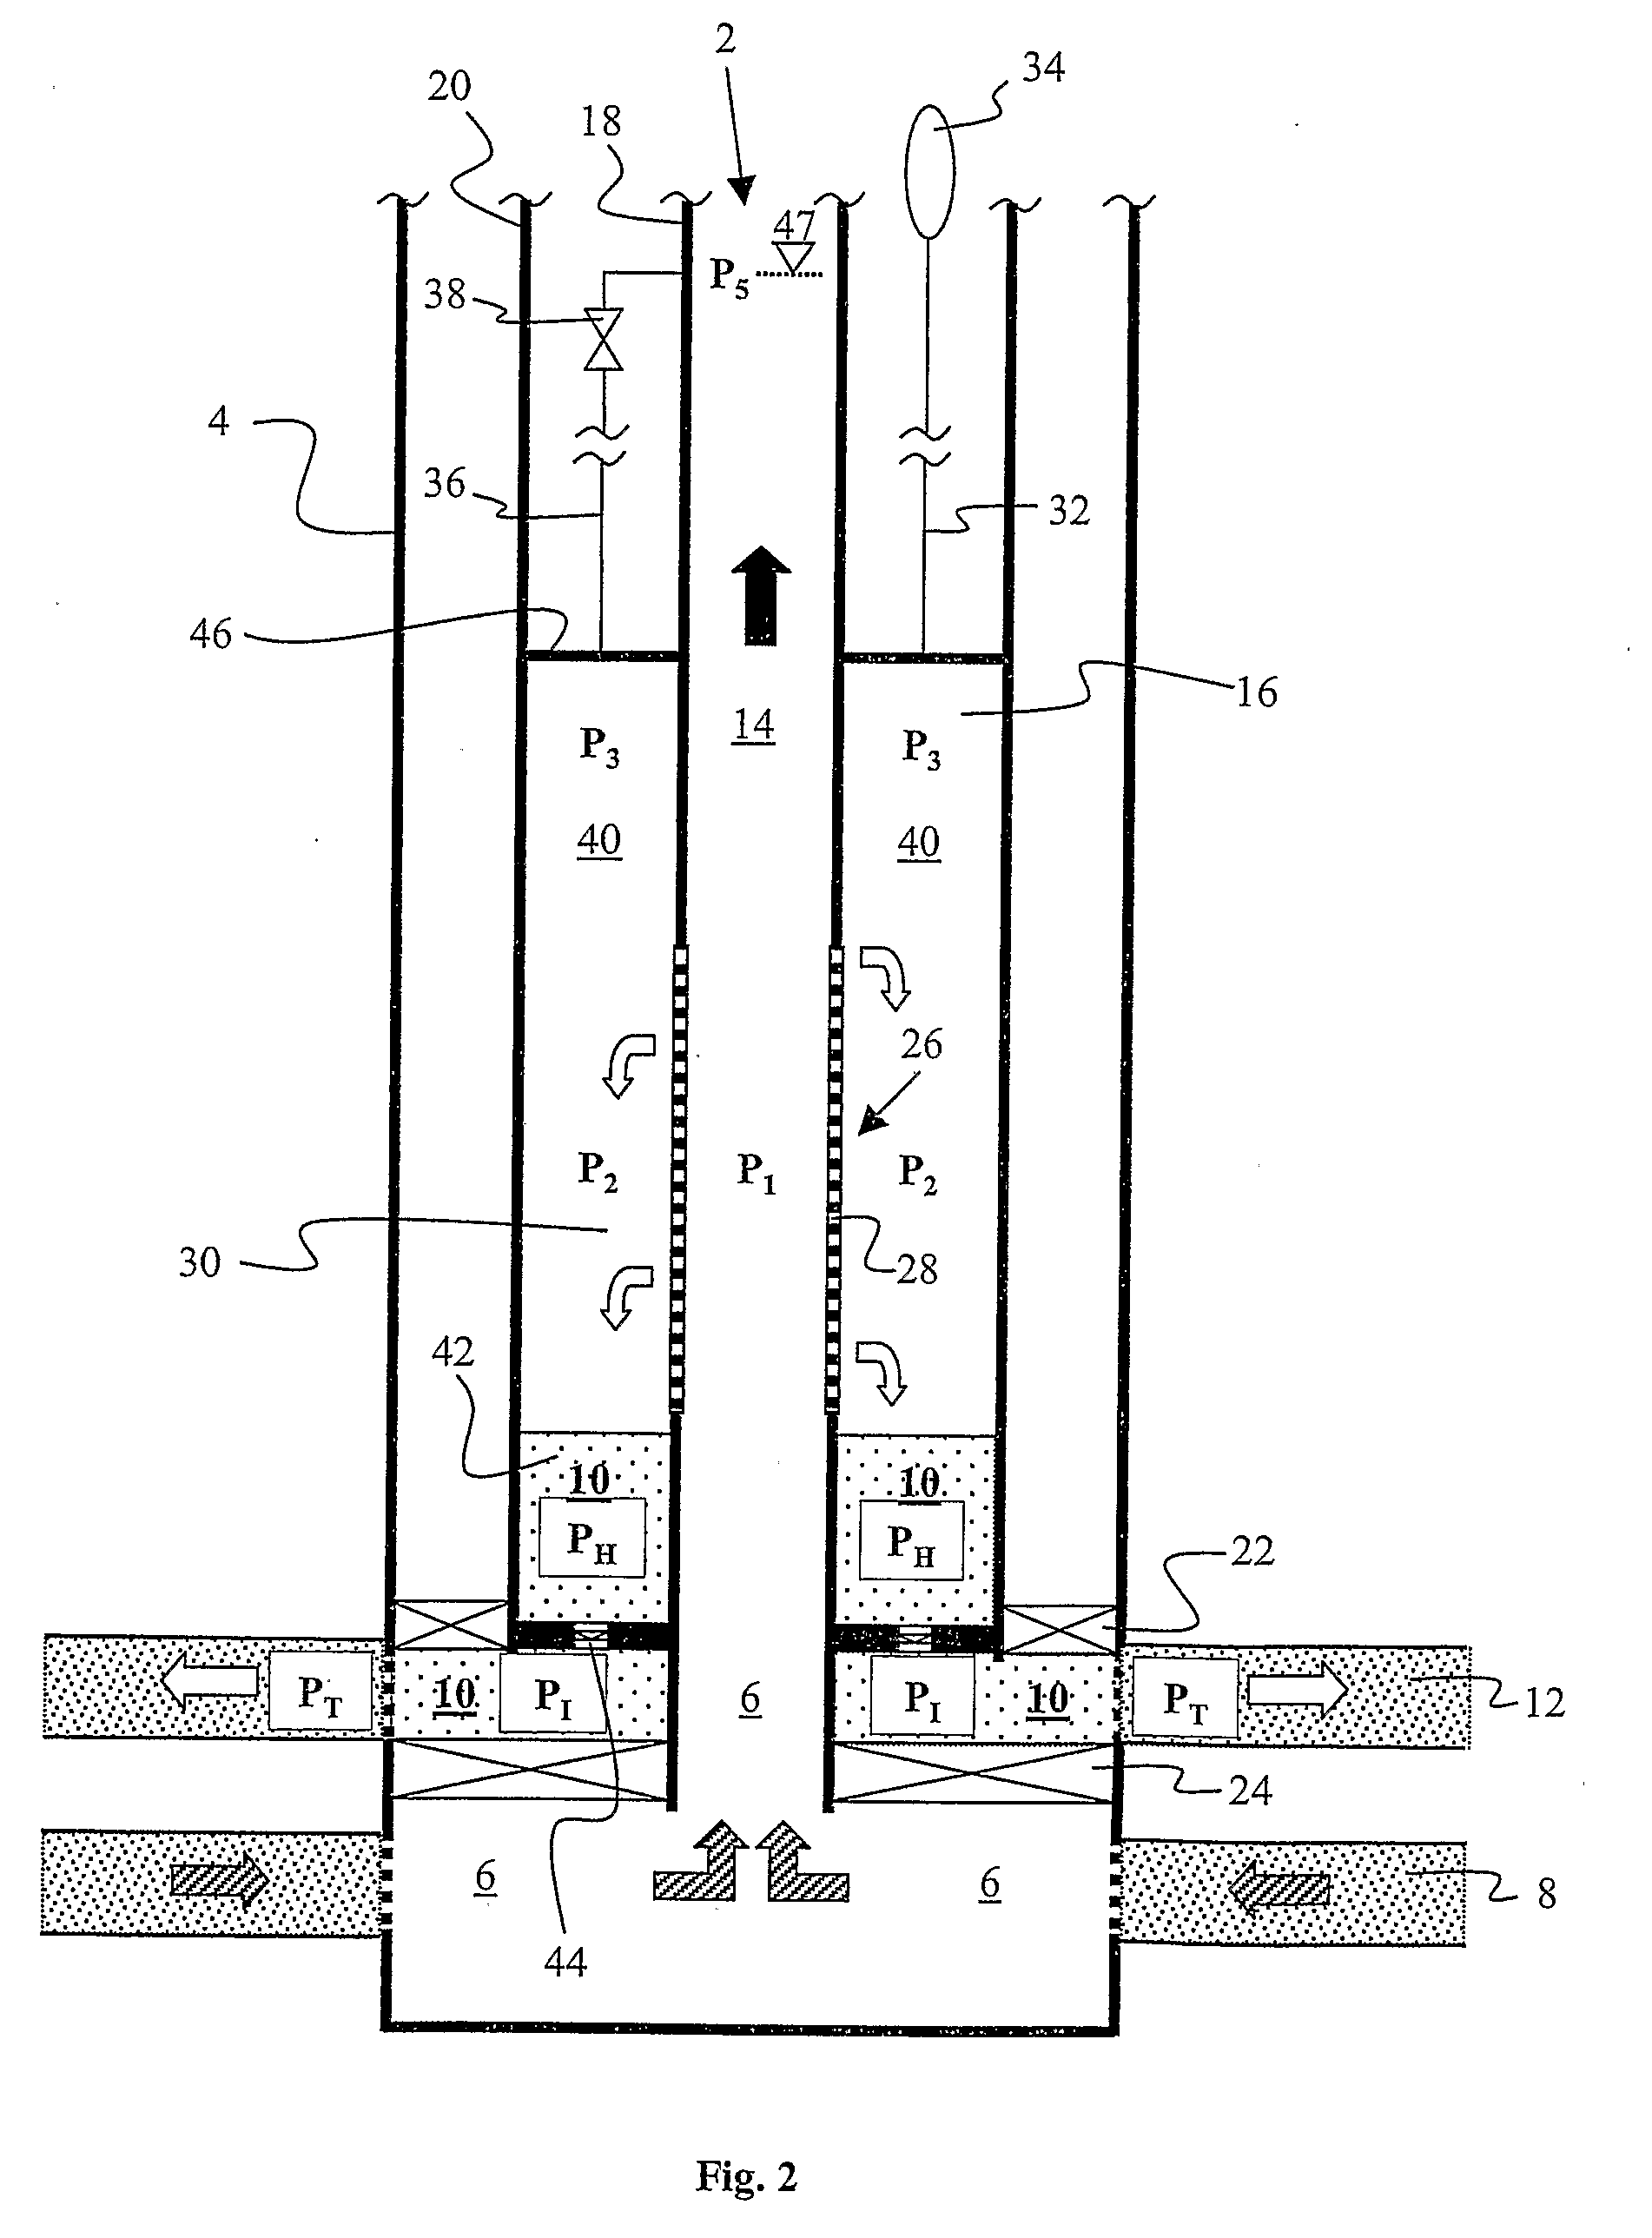 Method and an Apparatus for Separation and Injection of Water from a Water- and Hydrocarbon-Containing Outflow Down in a Production Well